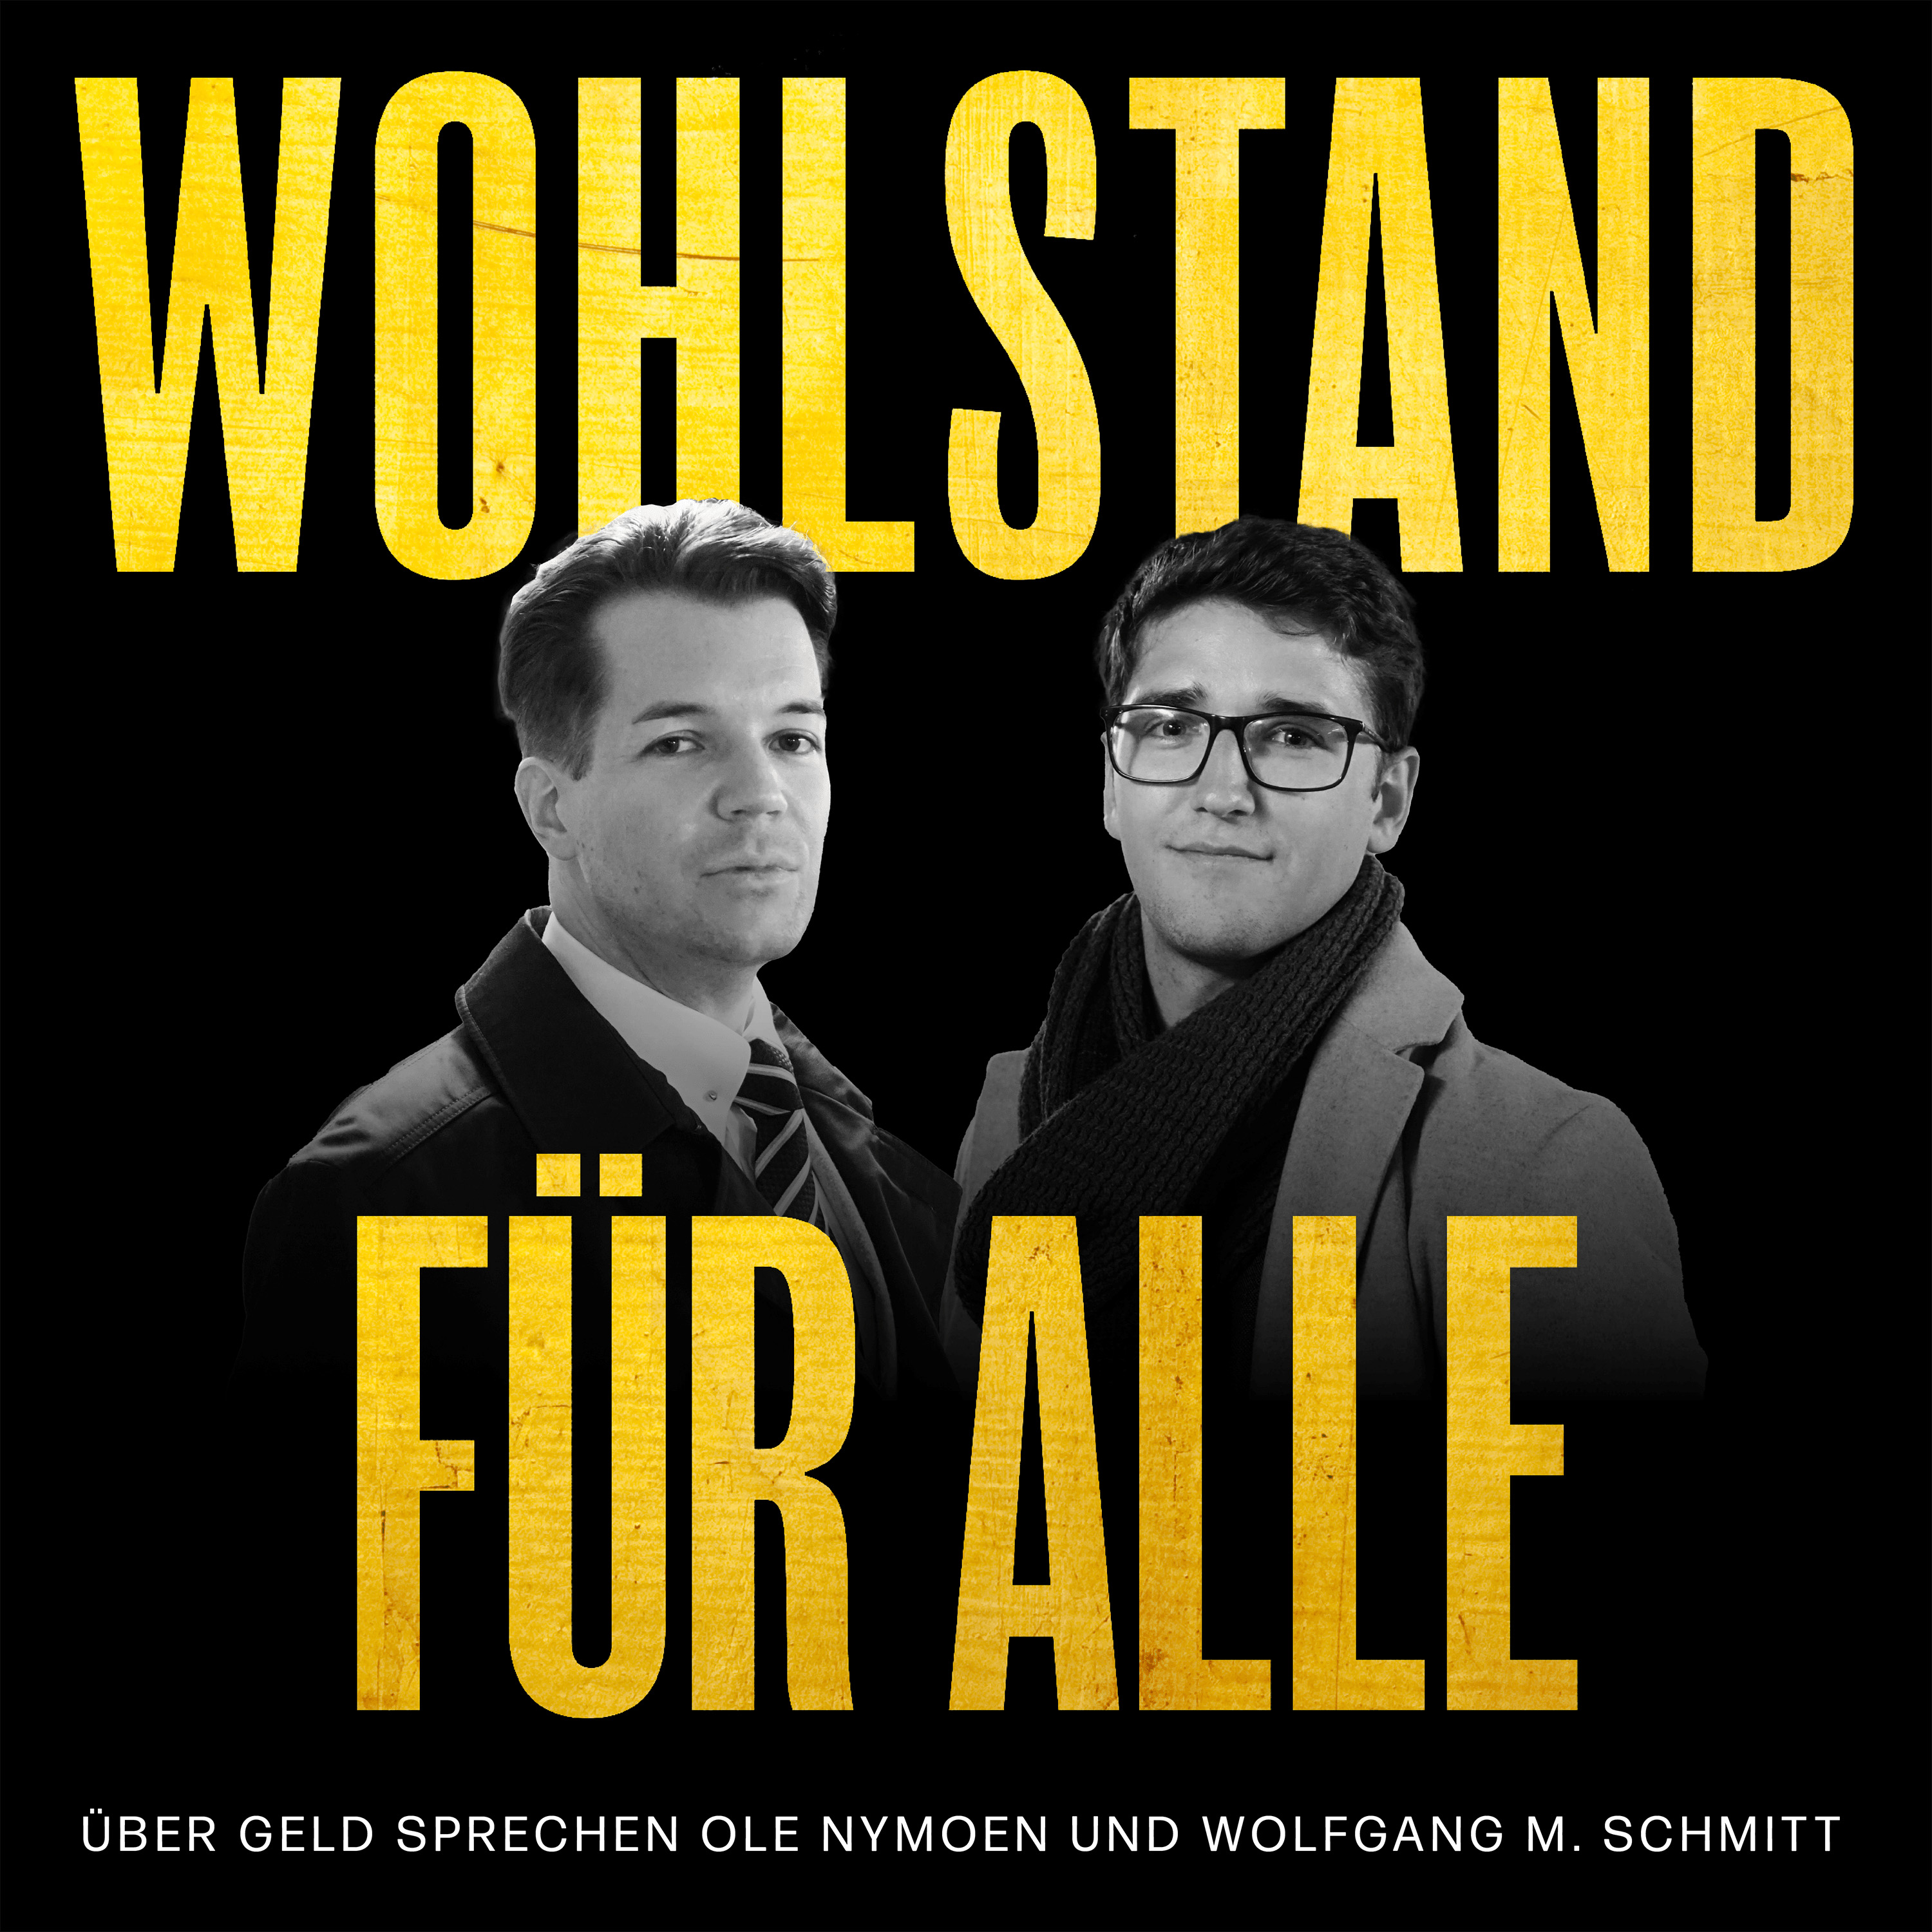 wohlstandfueralle.podigee.io